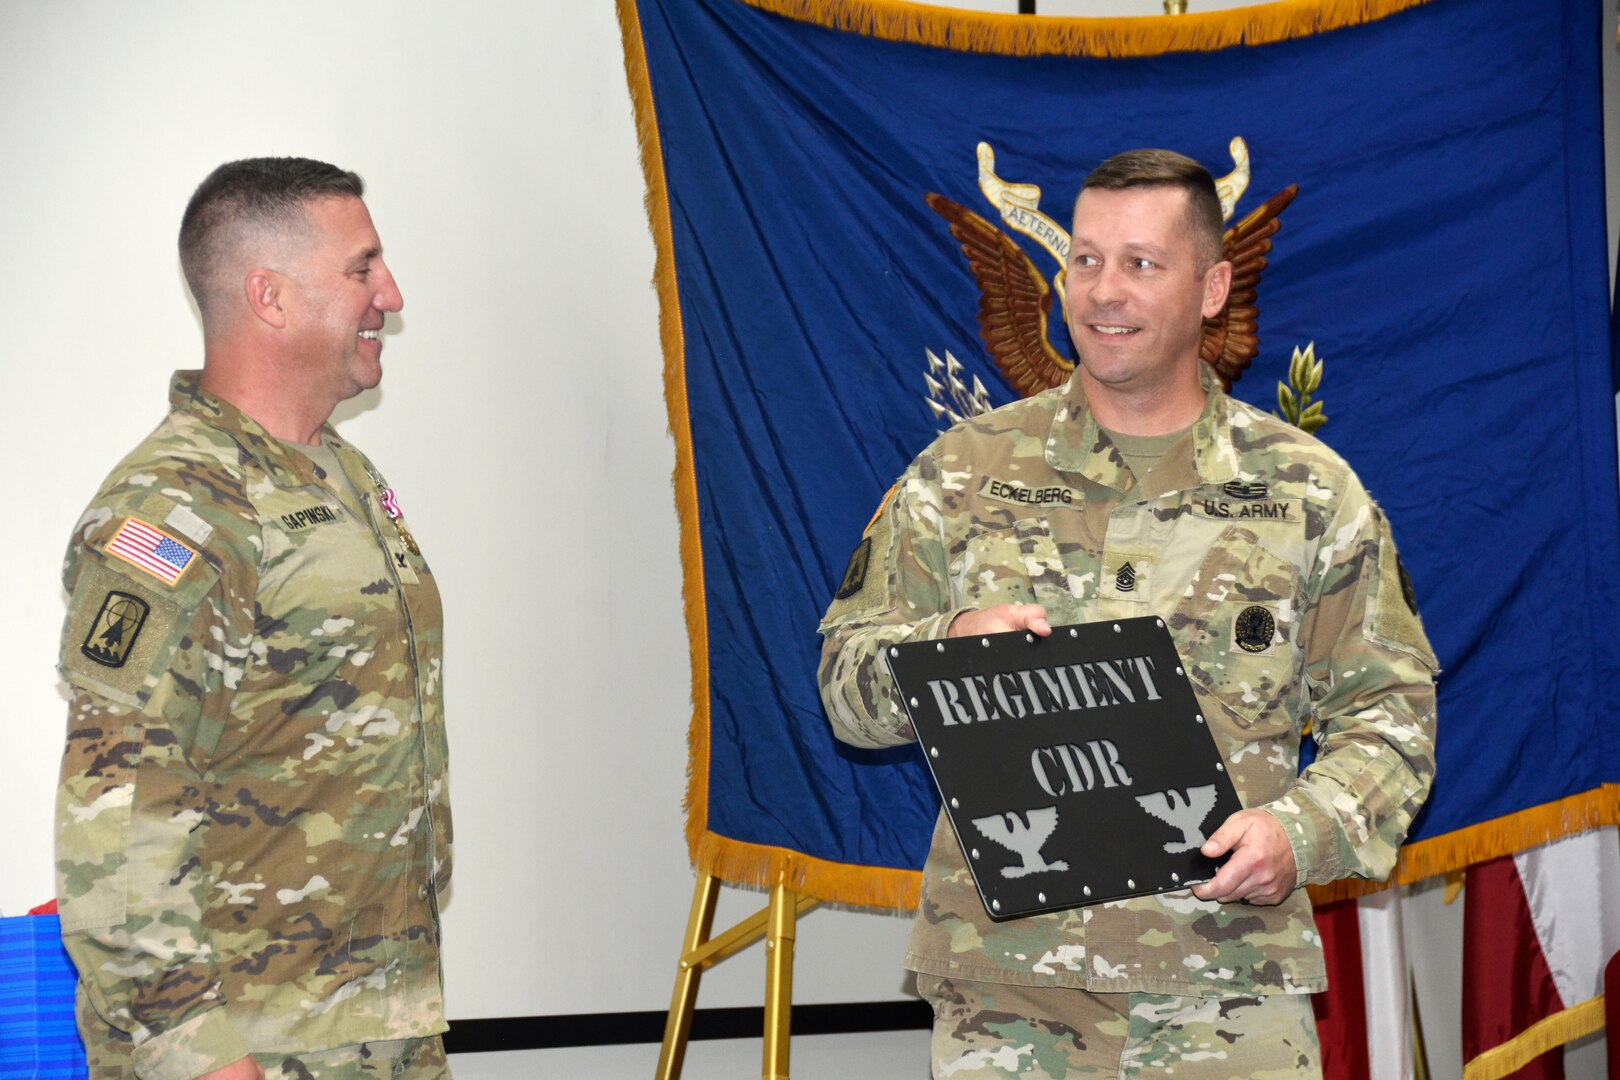 Command Sgt. Maj. Hayden Eckelberg, commandant for the Wisconsin Army National Guard’s 426th Regiment, presents outgoing commander Col. Paul Gapinski with a reserved parking sign during a formal change of command ceremony Oct. 14 at the Wisconsin Military Academy, Fort McCoy, Wis.